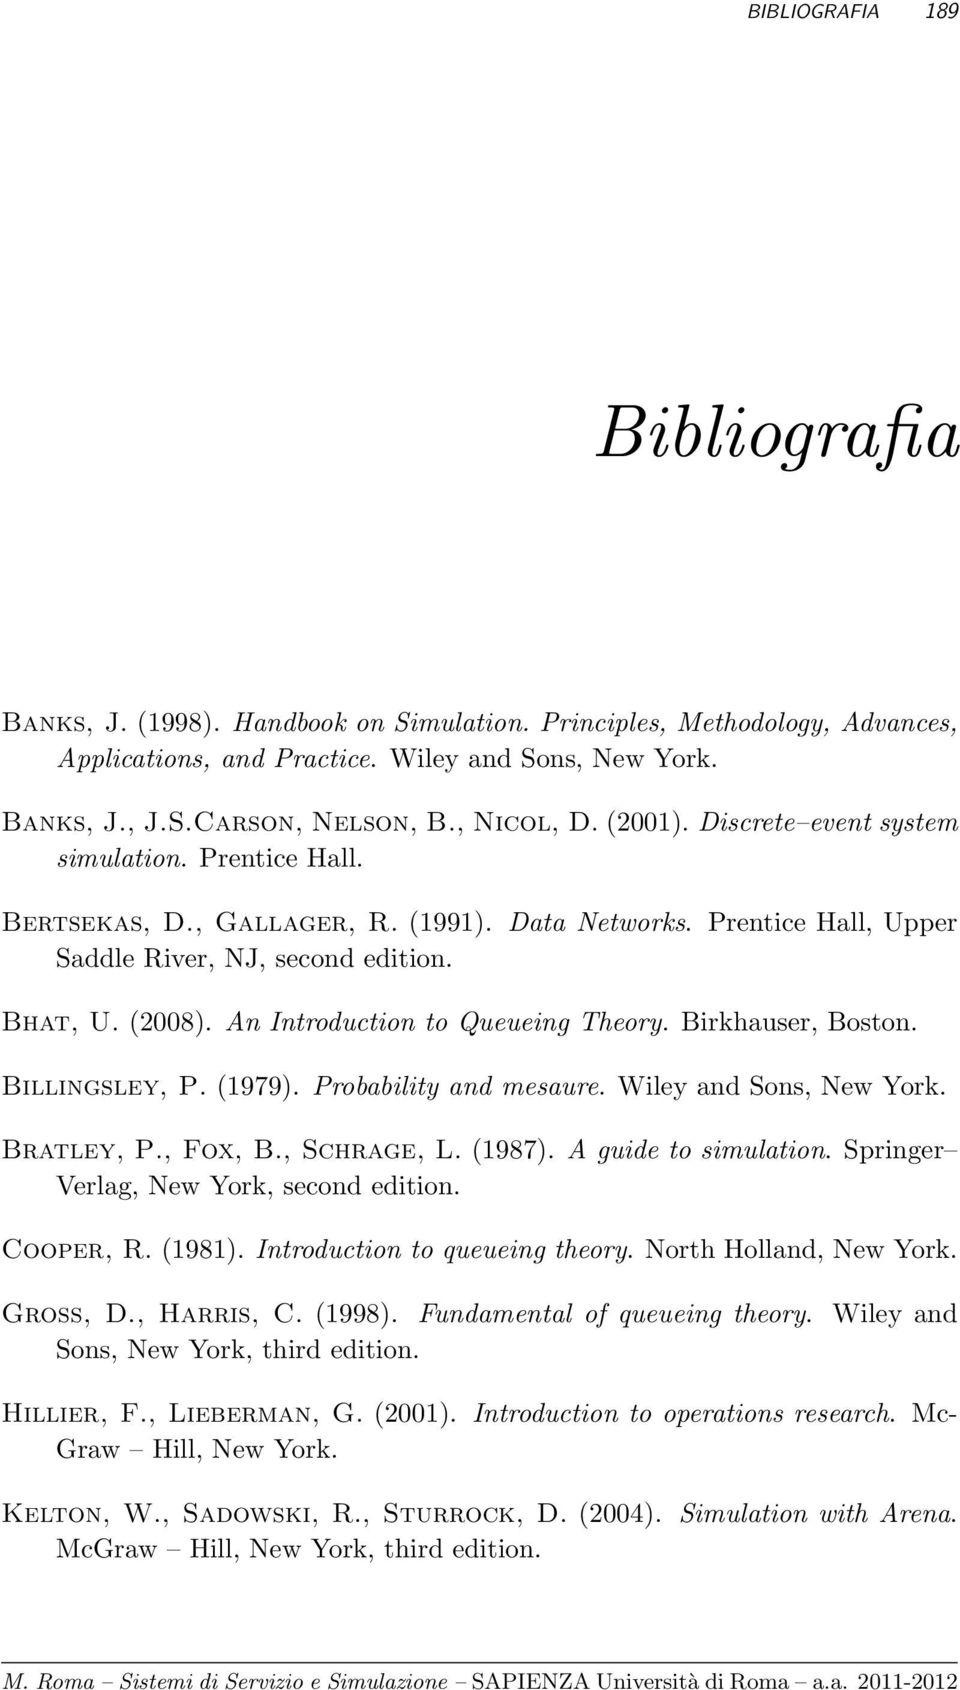 An Introduction to Queueing Theory. Birkhauser, Boston. Billingsley, P. (1979). Probability and mesaure. Wiley and Sons, New York. Bratley, P., Fox, B., Schrage, L. (1987). A guide to simulation.